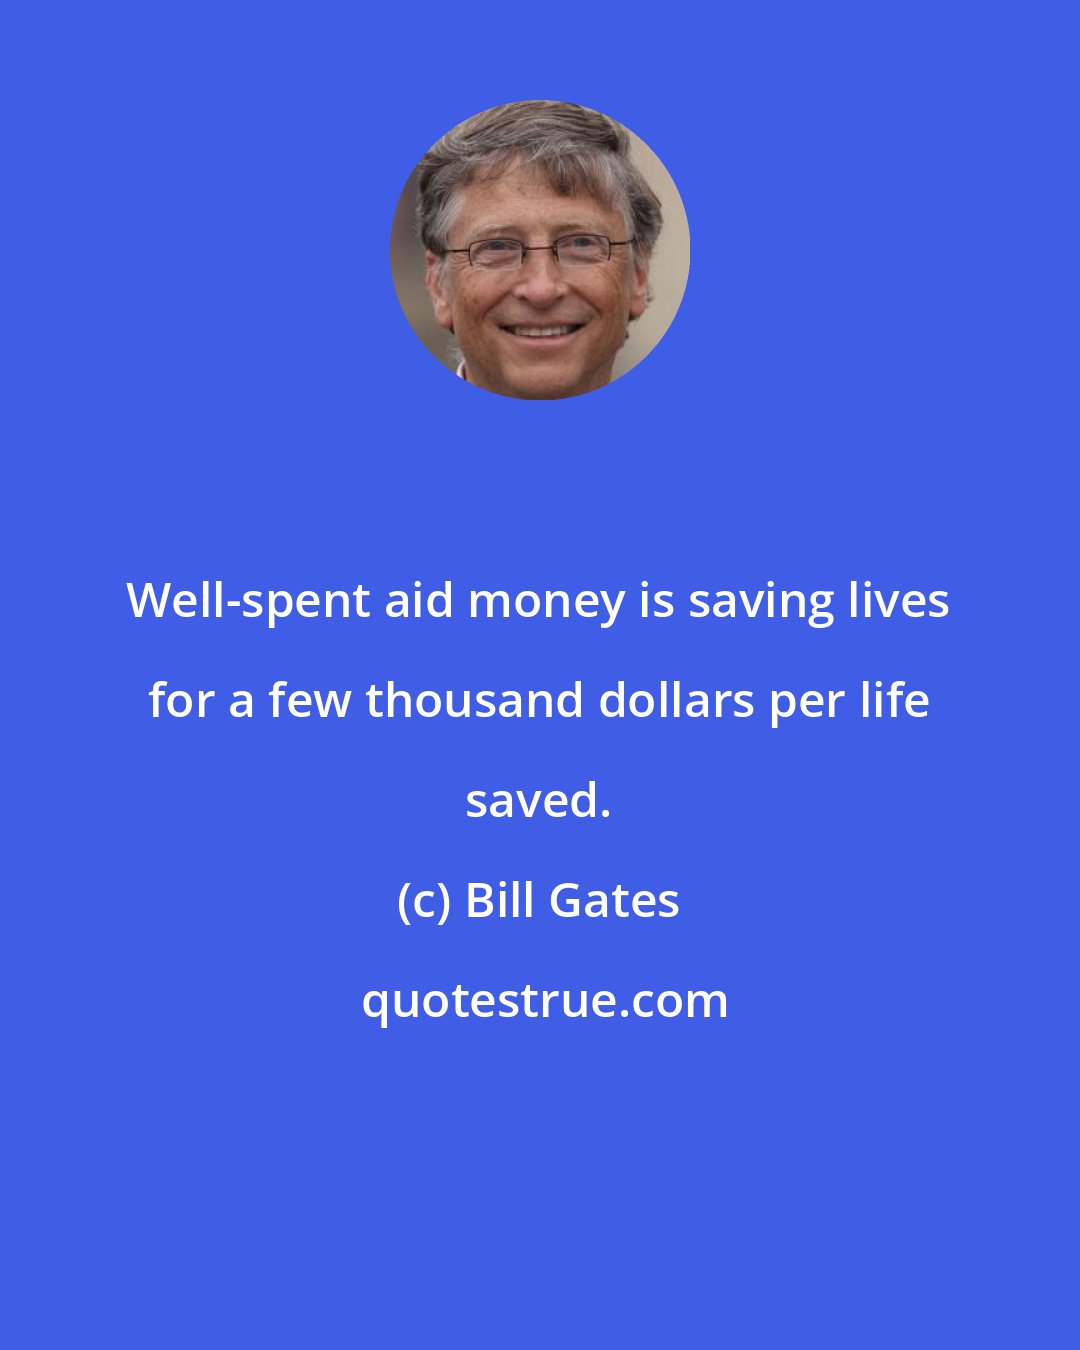 Bill Gates: Well-spent aid money is saving lives for a few thousand dollars per life saved.